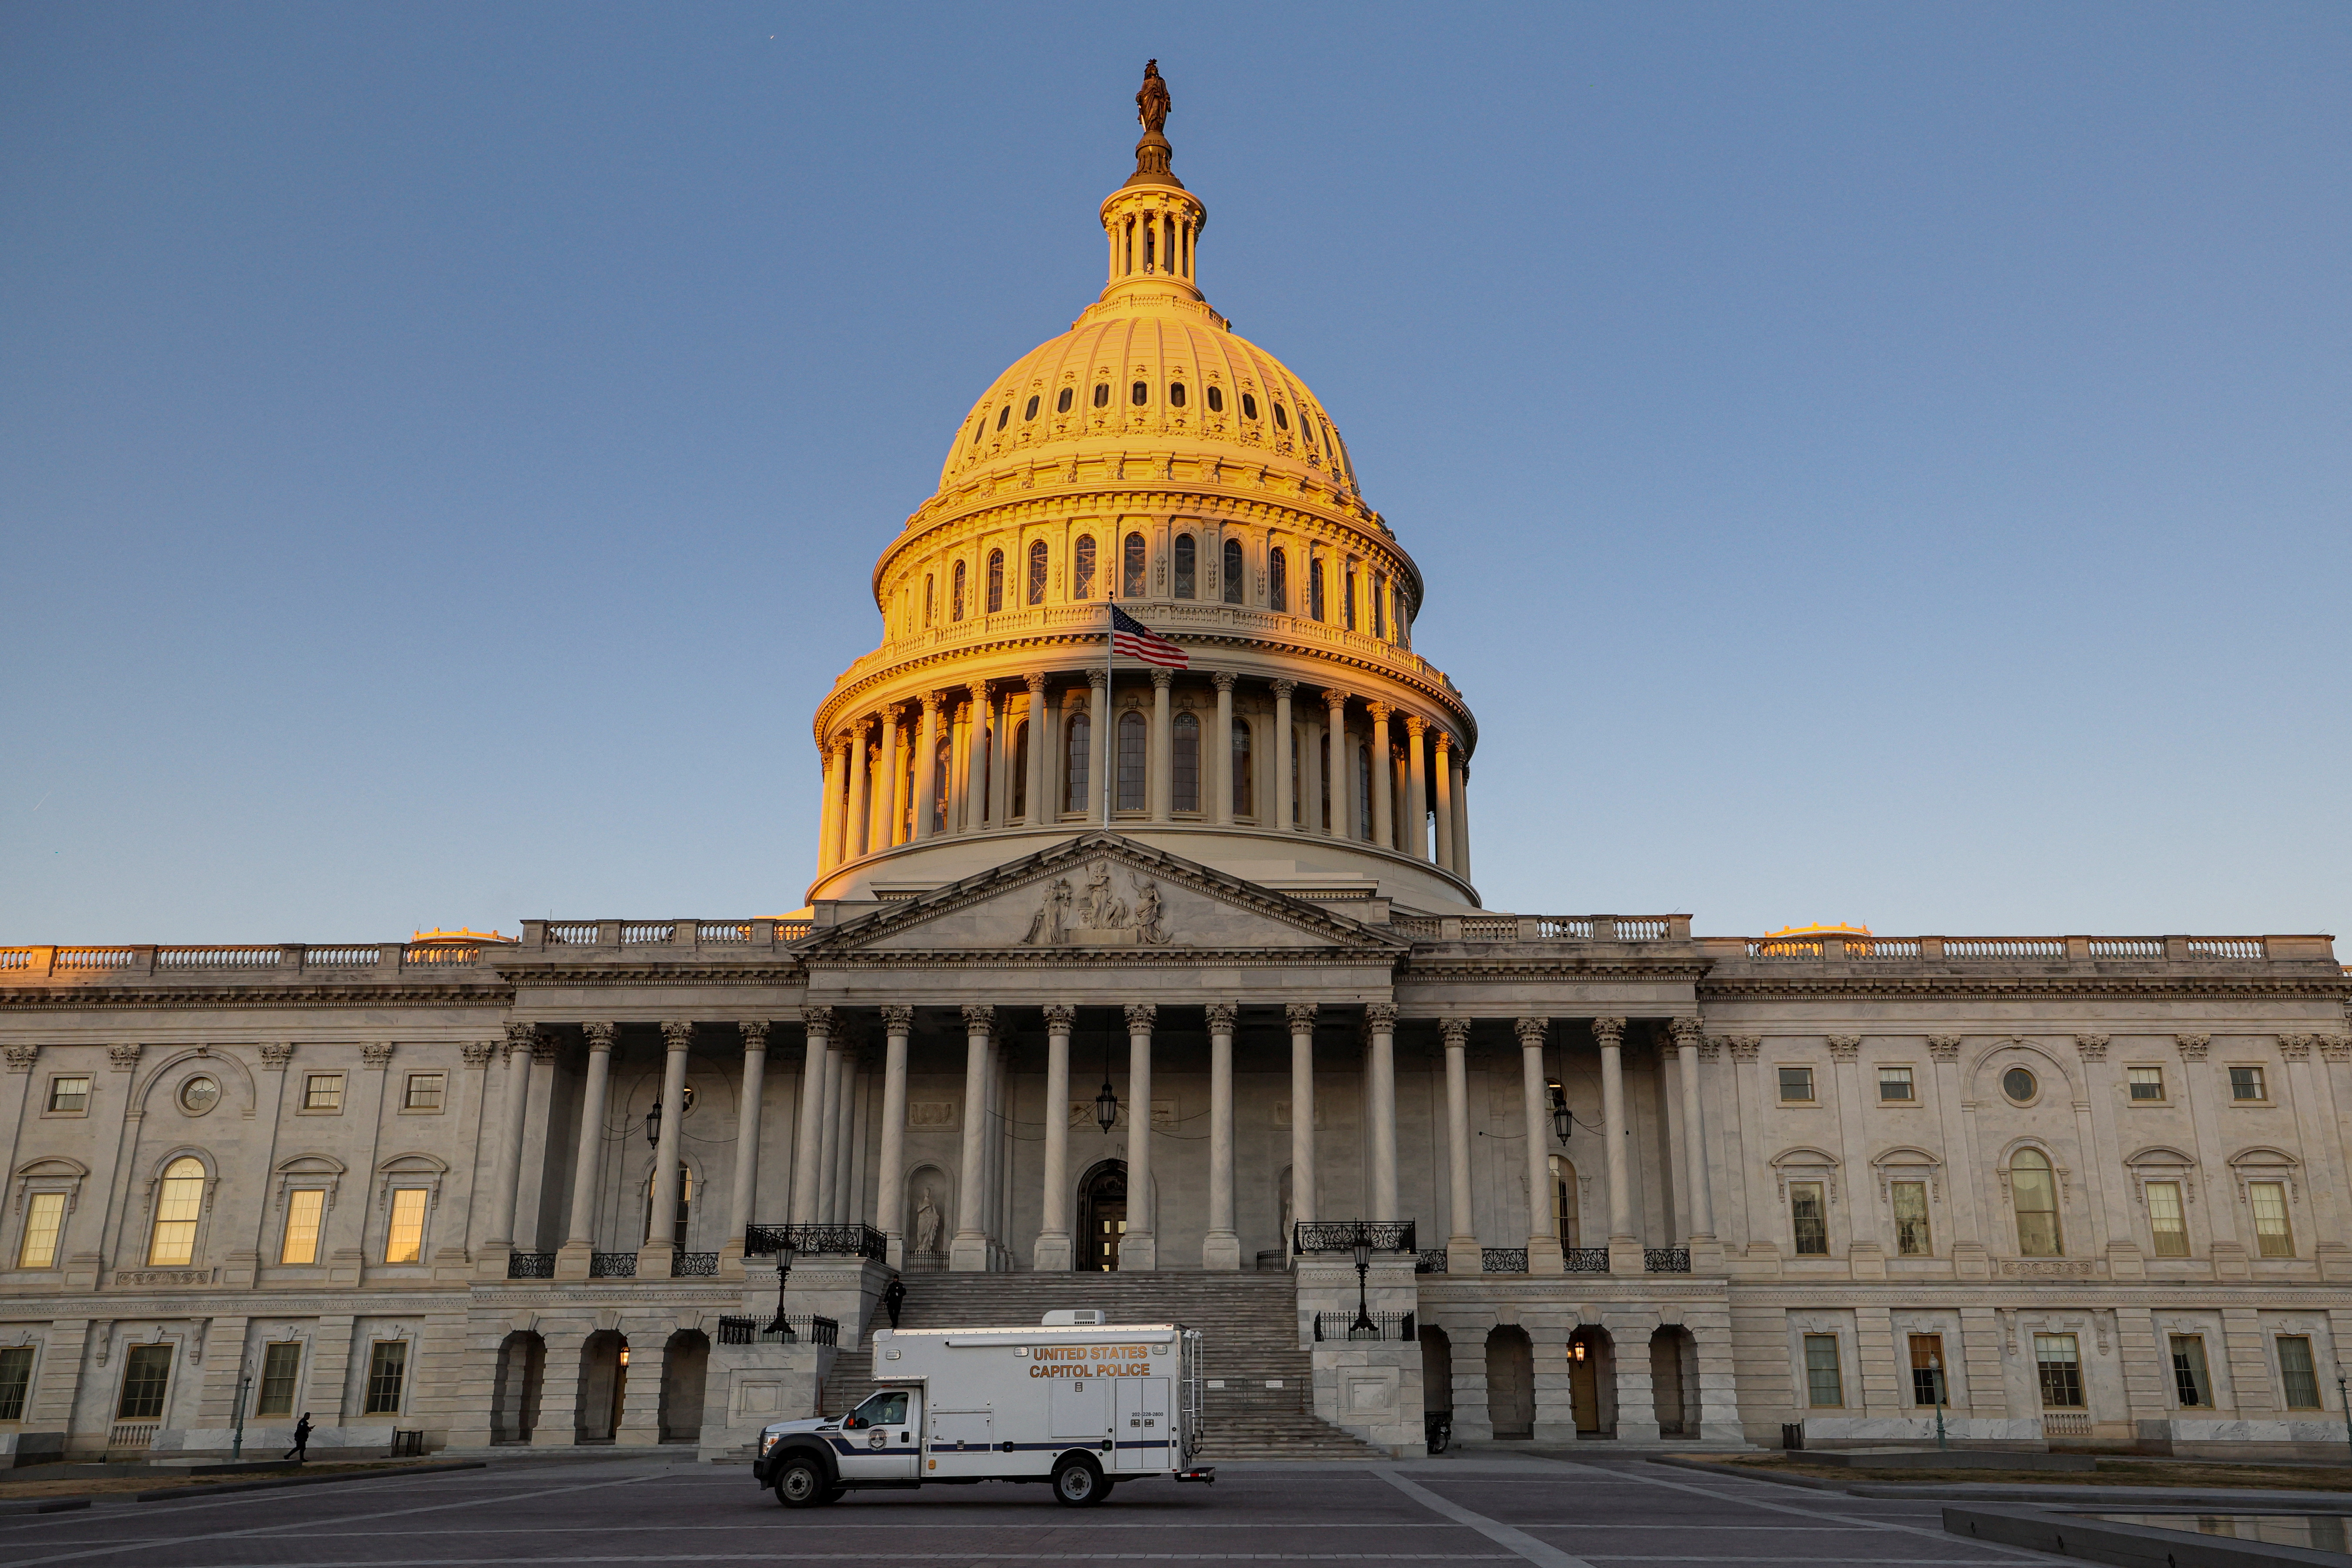 A U.S. Capitol Police truck passes by the front of the U.S. Capitol building during morning hours in Washington